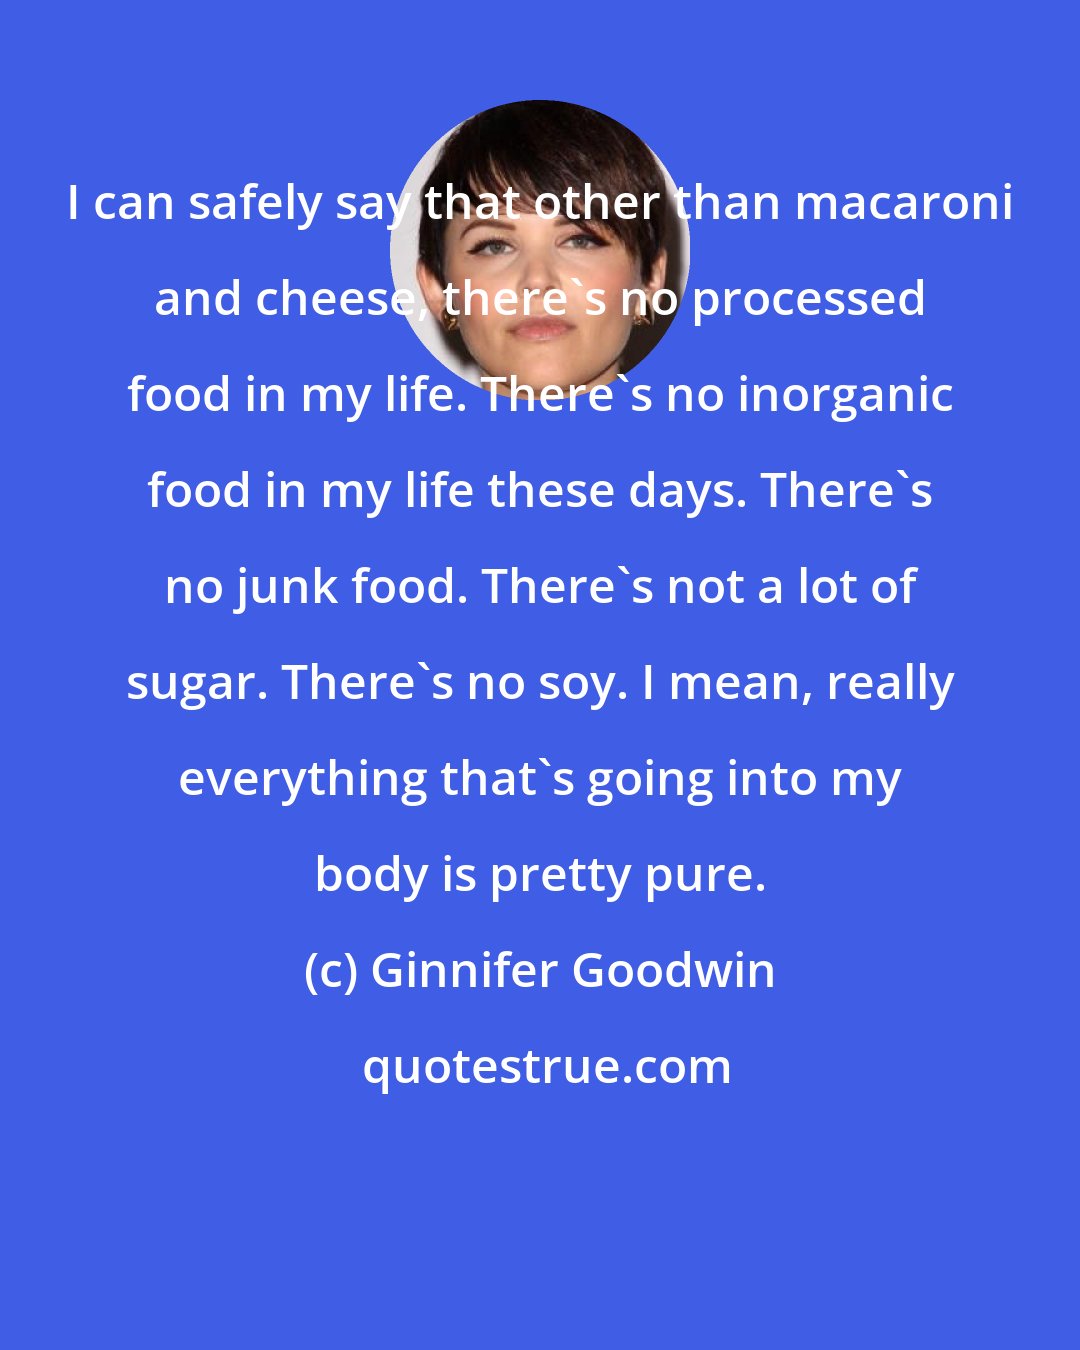 Ginnifer Goodwin: I can safely say that other than macaroni and cheese, there's no processed food in my life. There's no inorganic food in my life these days. There's no junk food. There's not a lot of sugar. There's no soy. I mean, really everything that's going into my body is pretty pure.